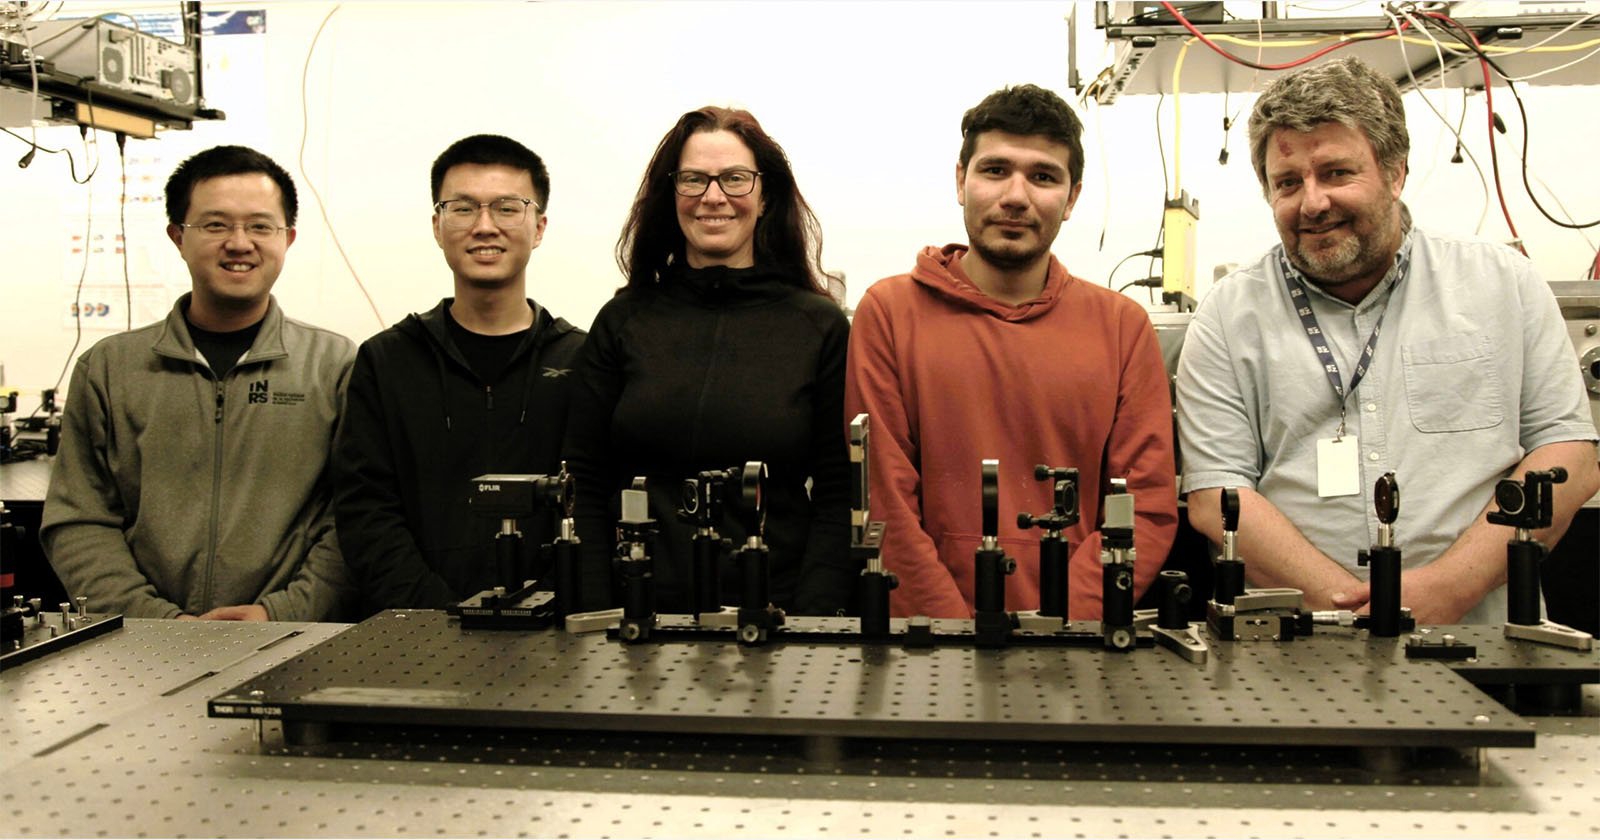 Scientists Invent Worlds Fastest Camera That Shoots 156.3 Trillion Frames Per Second